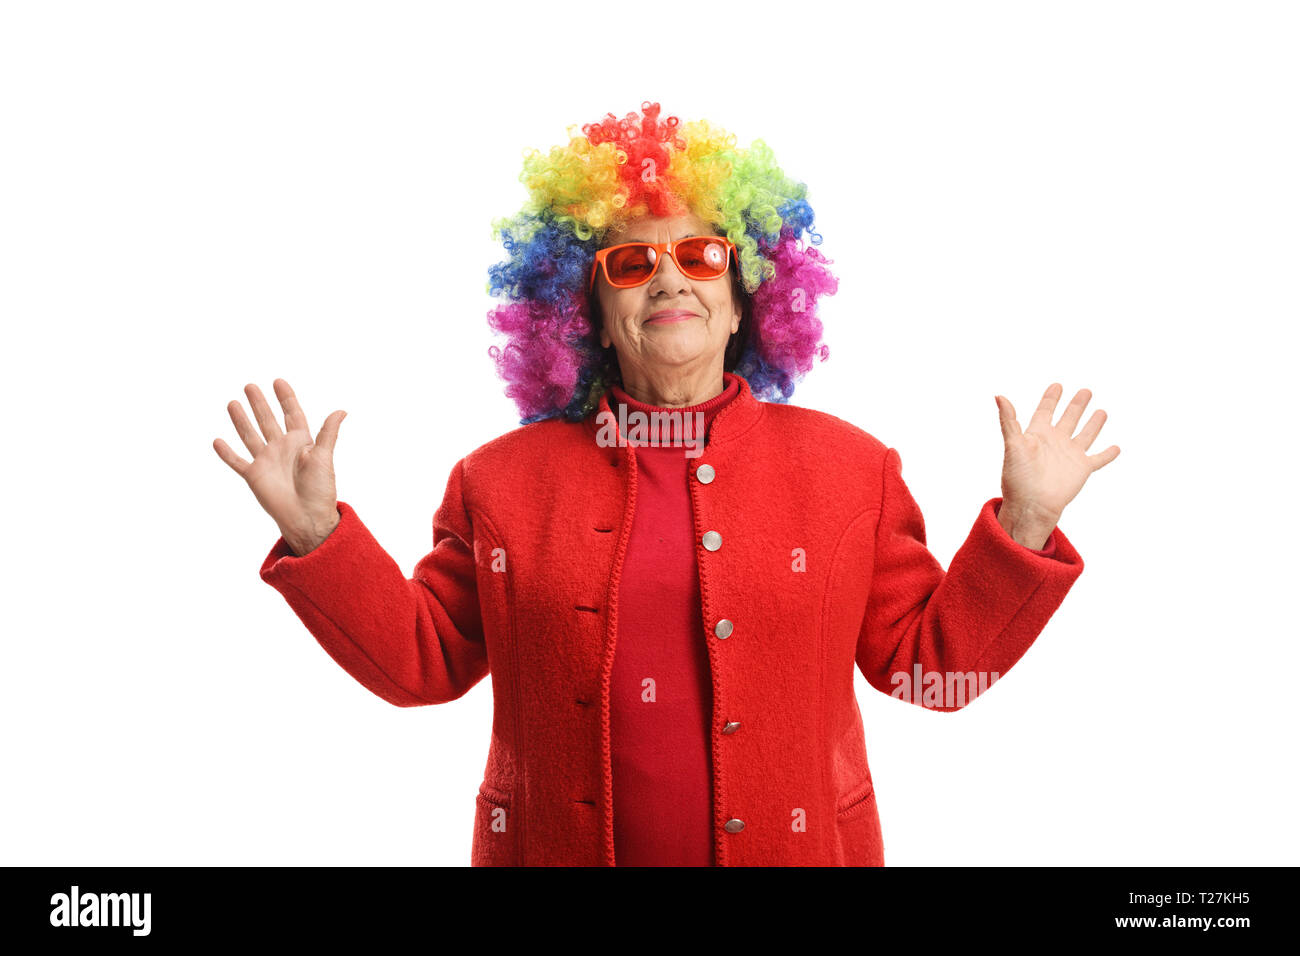 Mature woman with a colorful wig isolated on white background Stock Photo